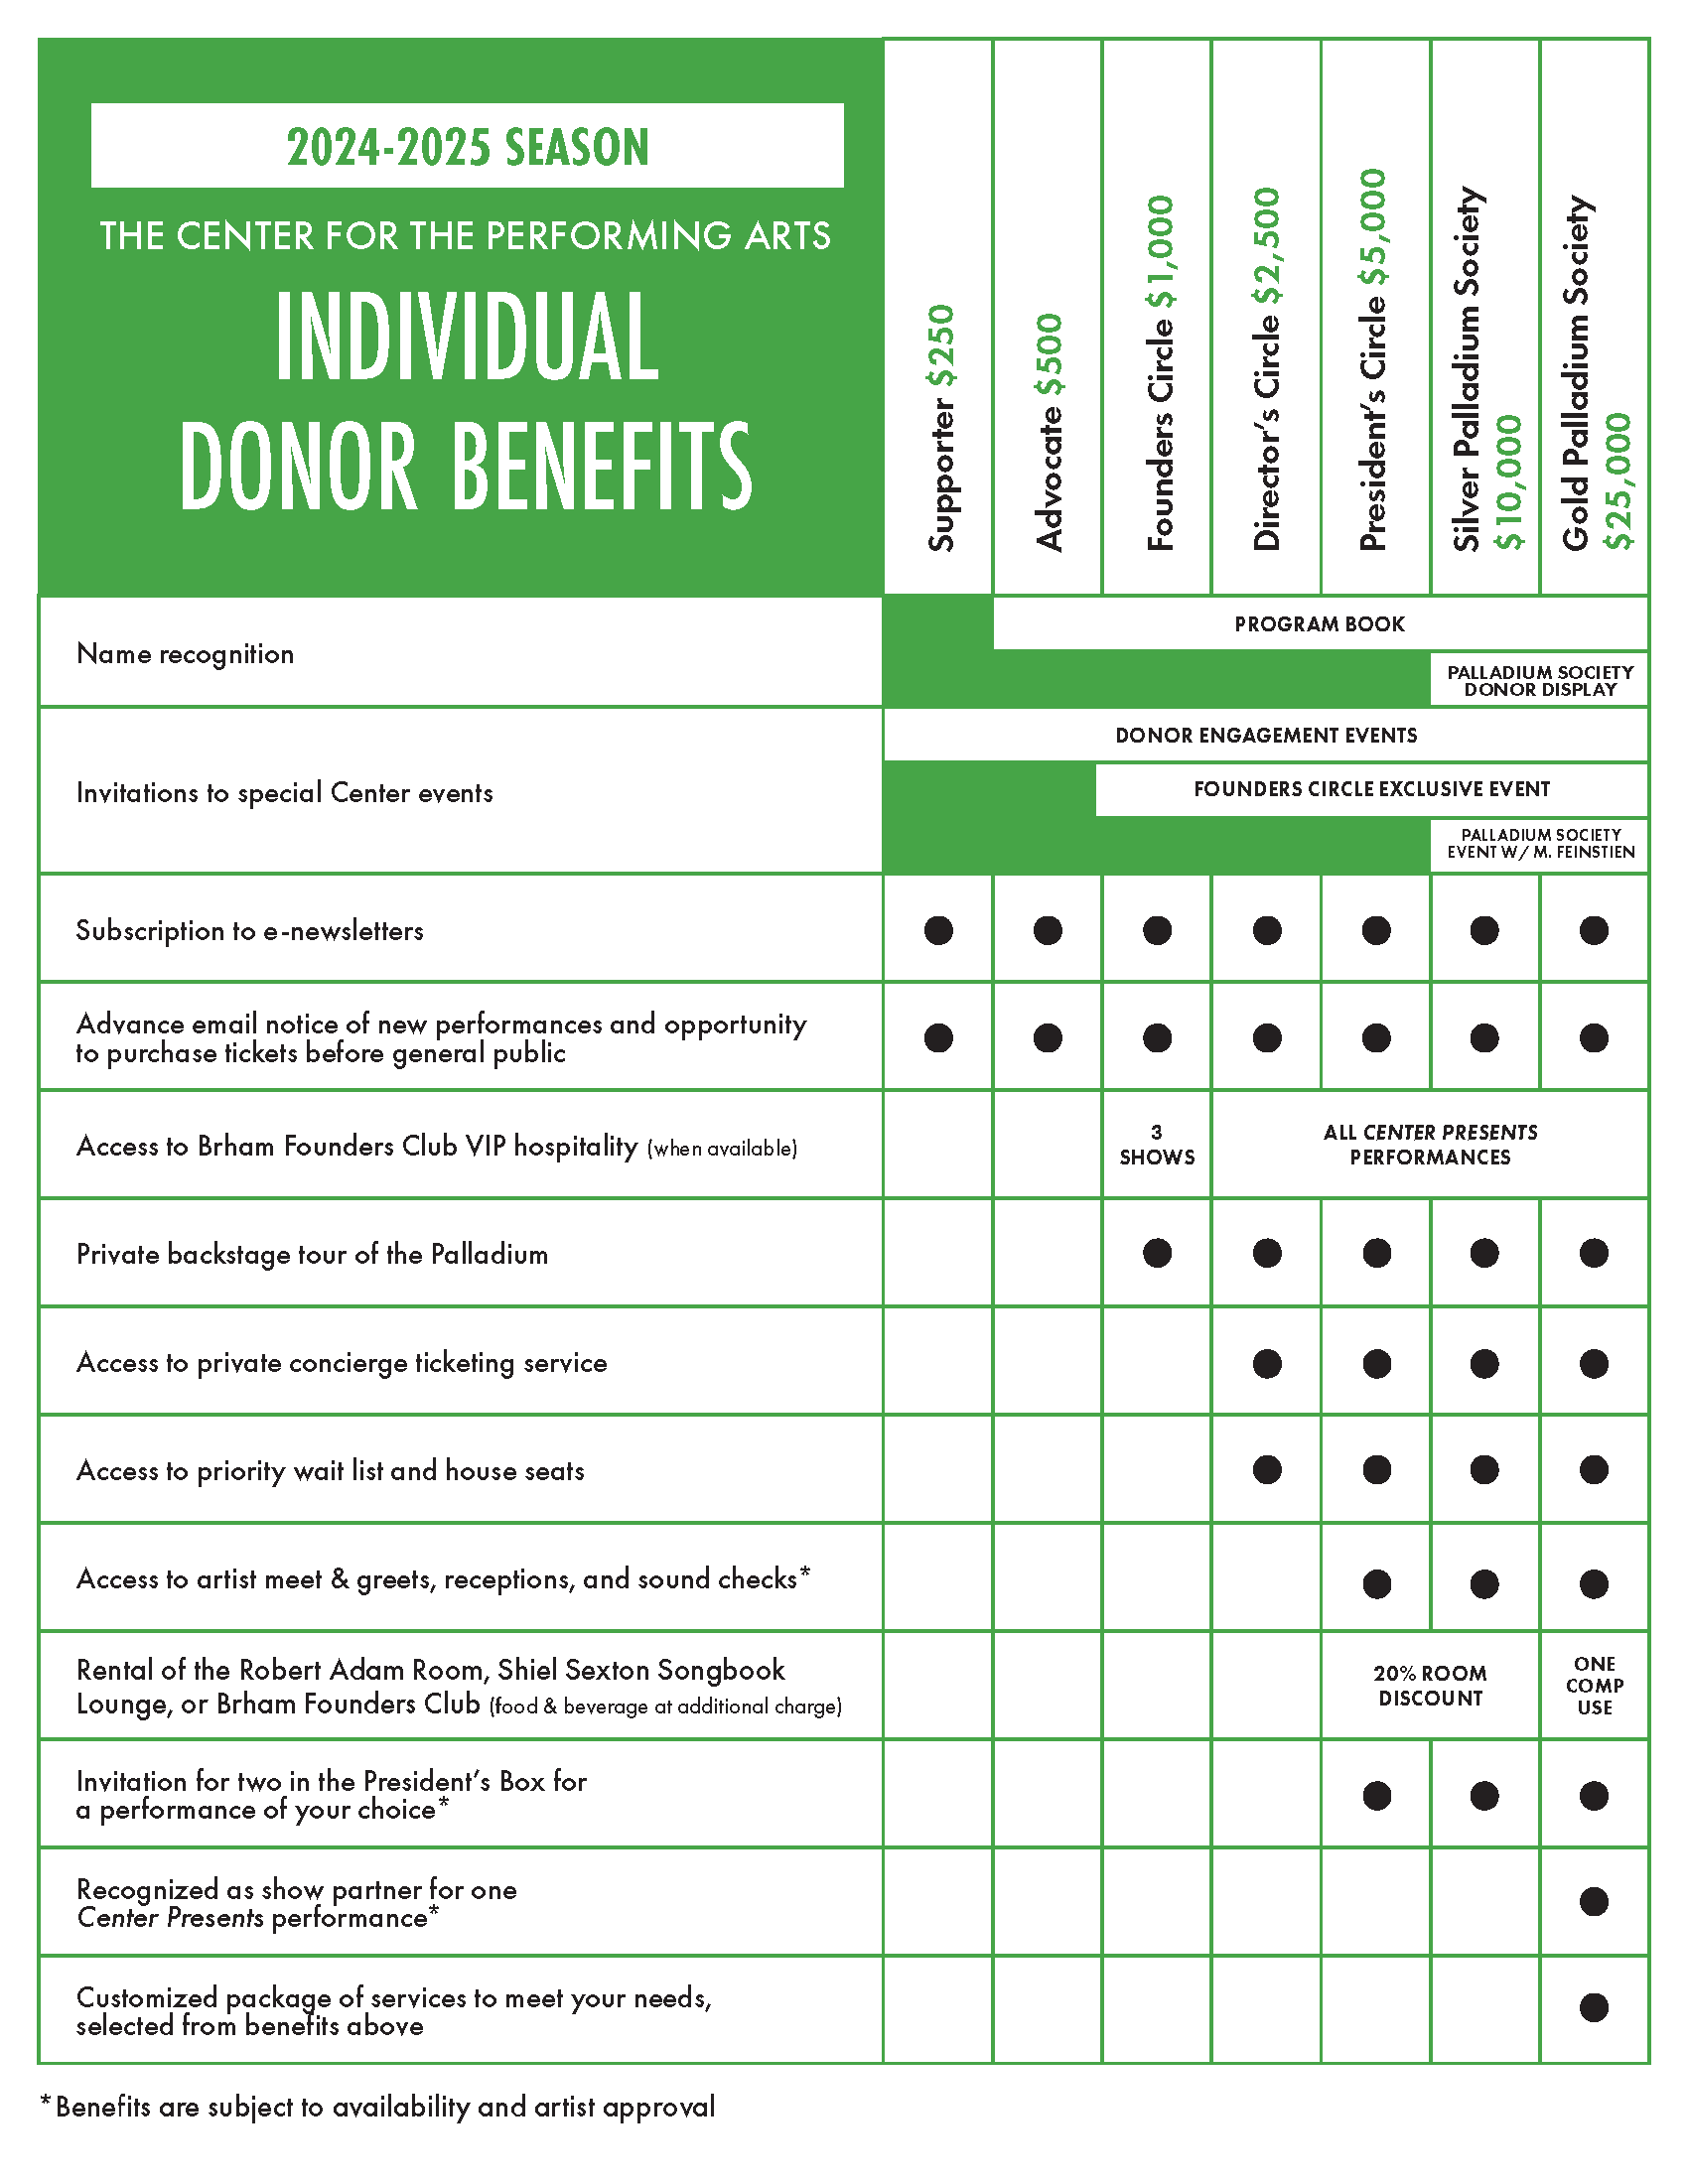 Individual Donor Benefits chart for 2024-2025 season. Please contact our development team at 317-819-3533 to discuss details, or click to open a PDF.